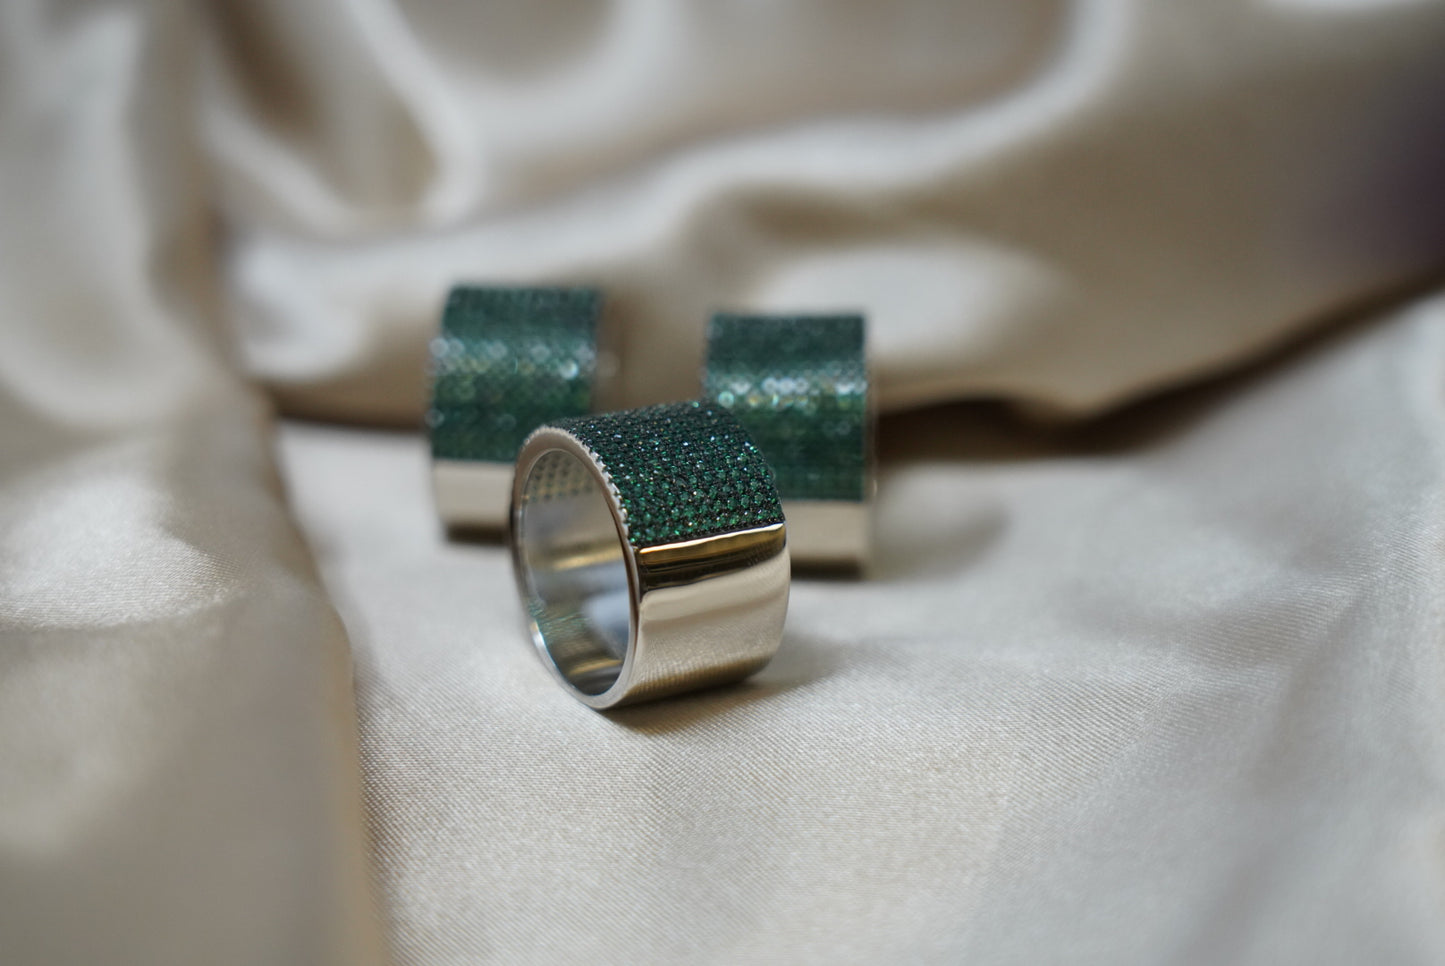 Stunning Stainless Steel Green Cubic Zirconia Ring